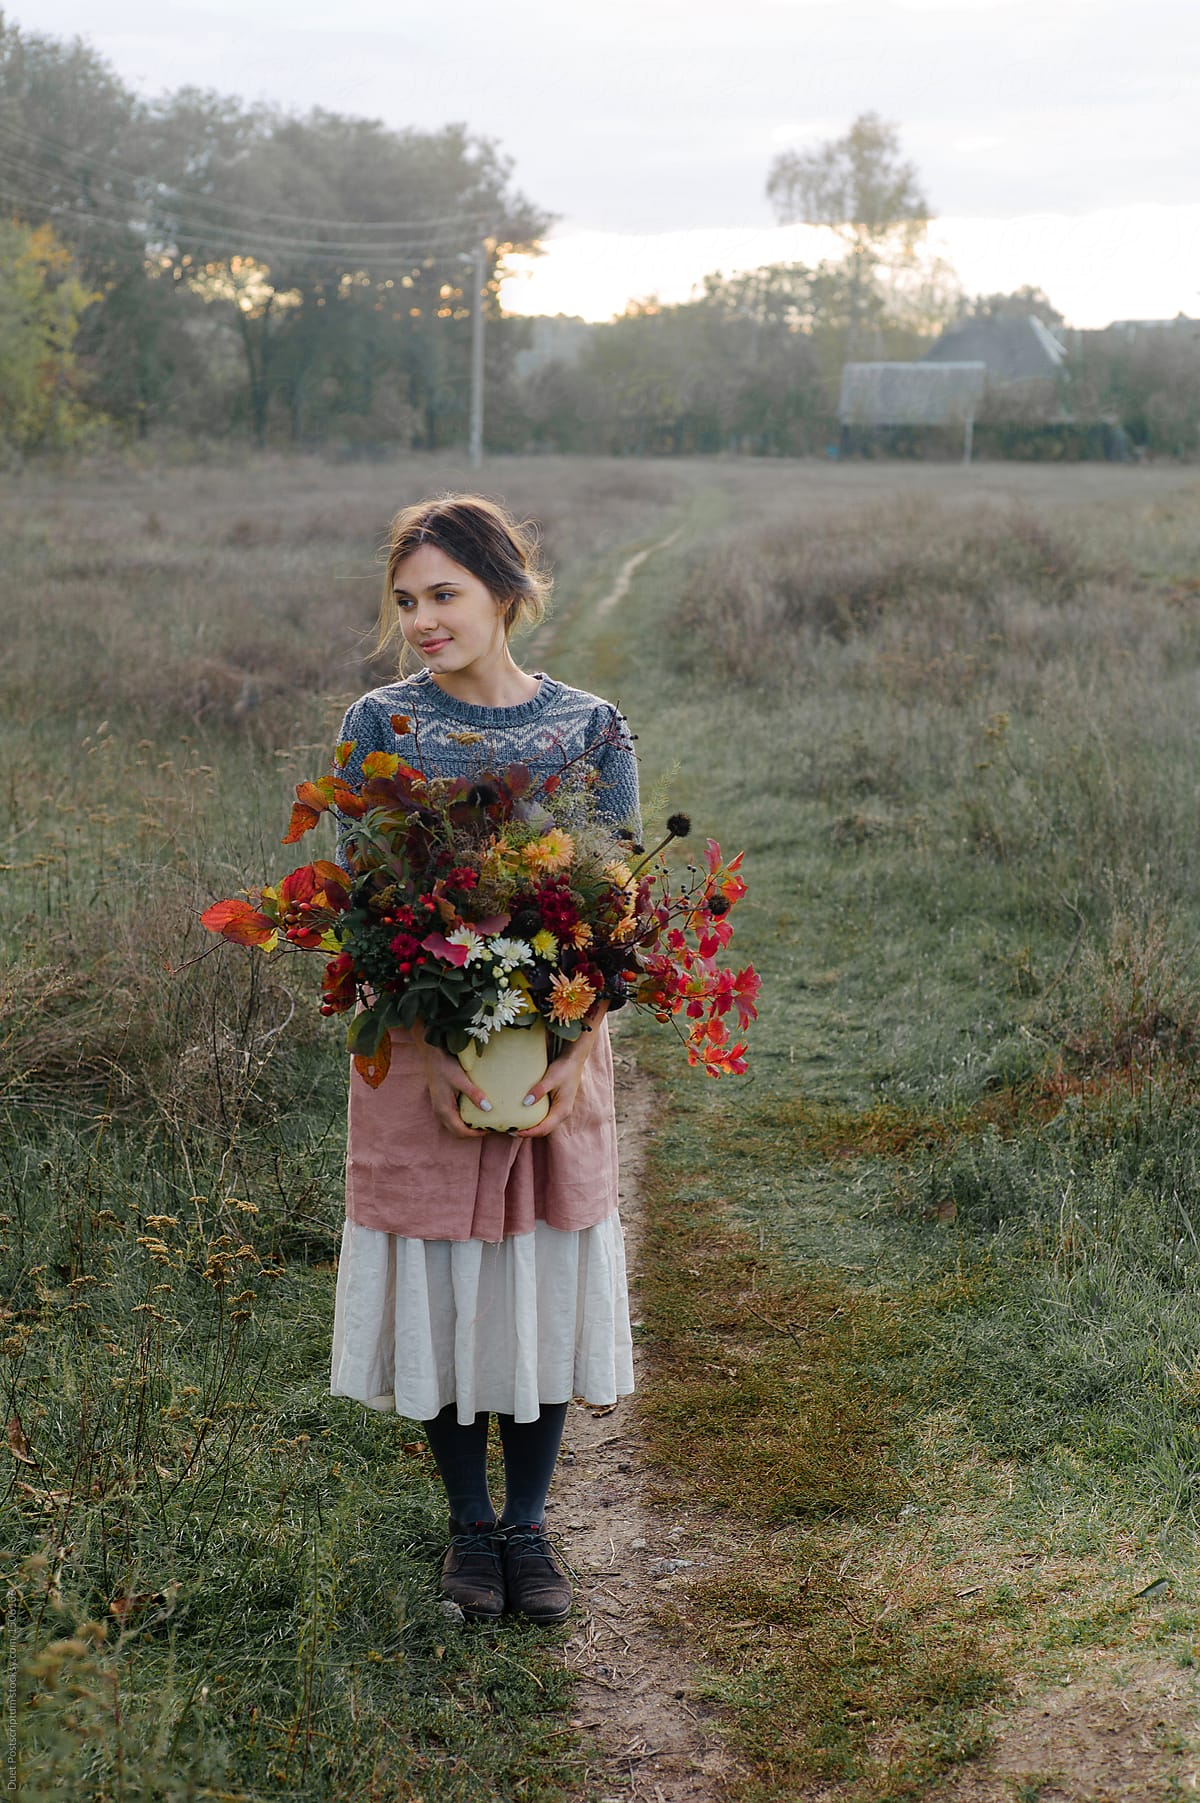 Woman holding bunch of rustic flowers